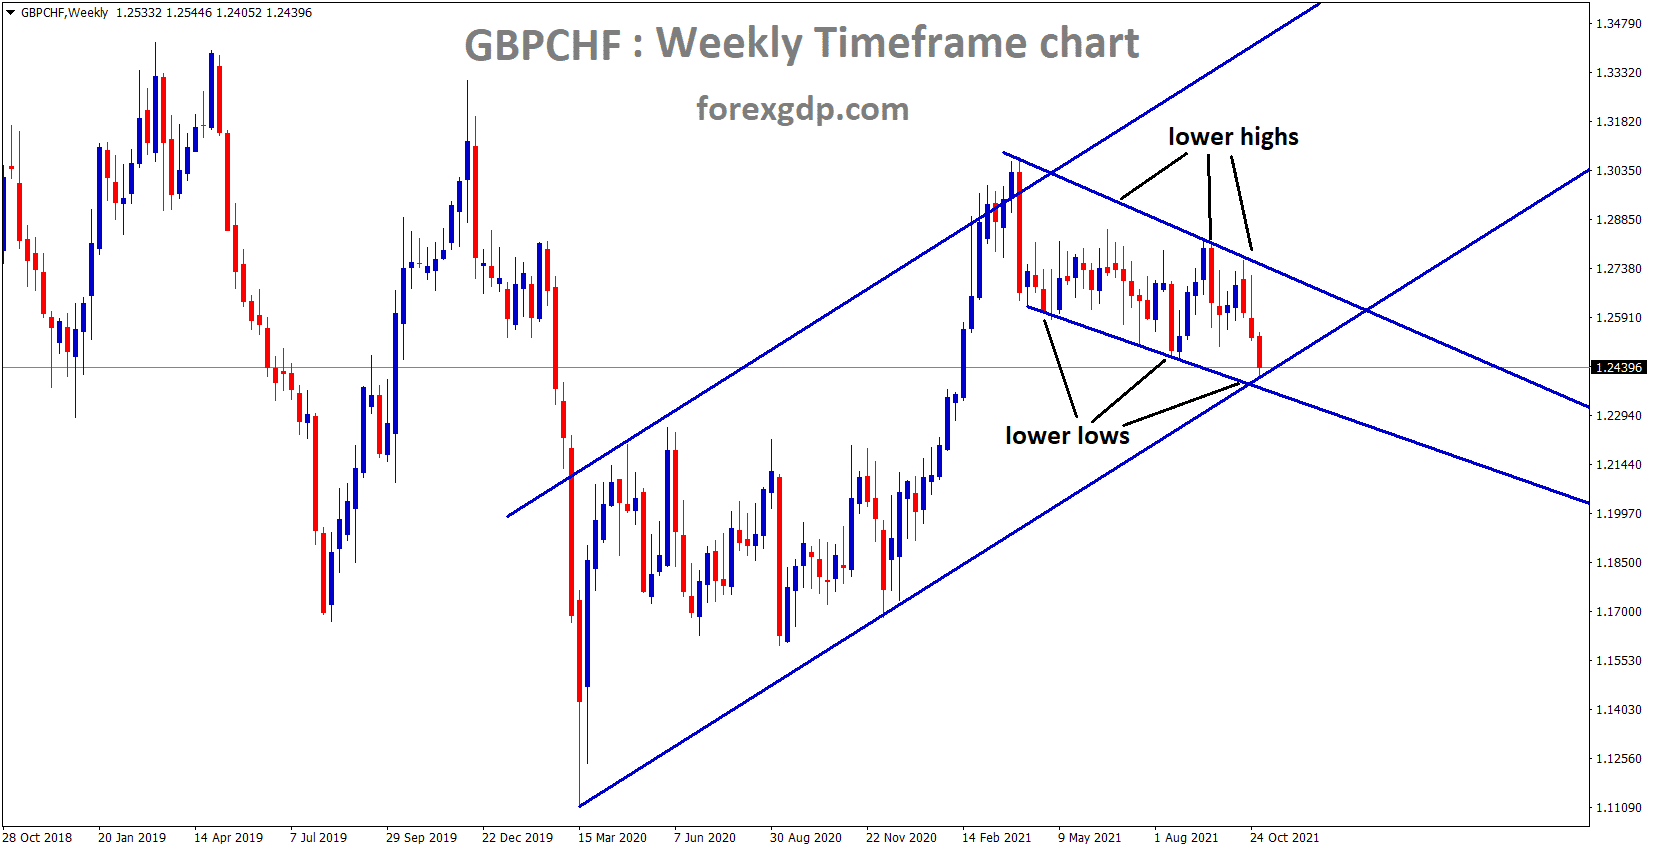 GBPCHF is moving in an ascending channel and the market is standing at the higher low